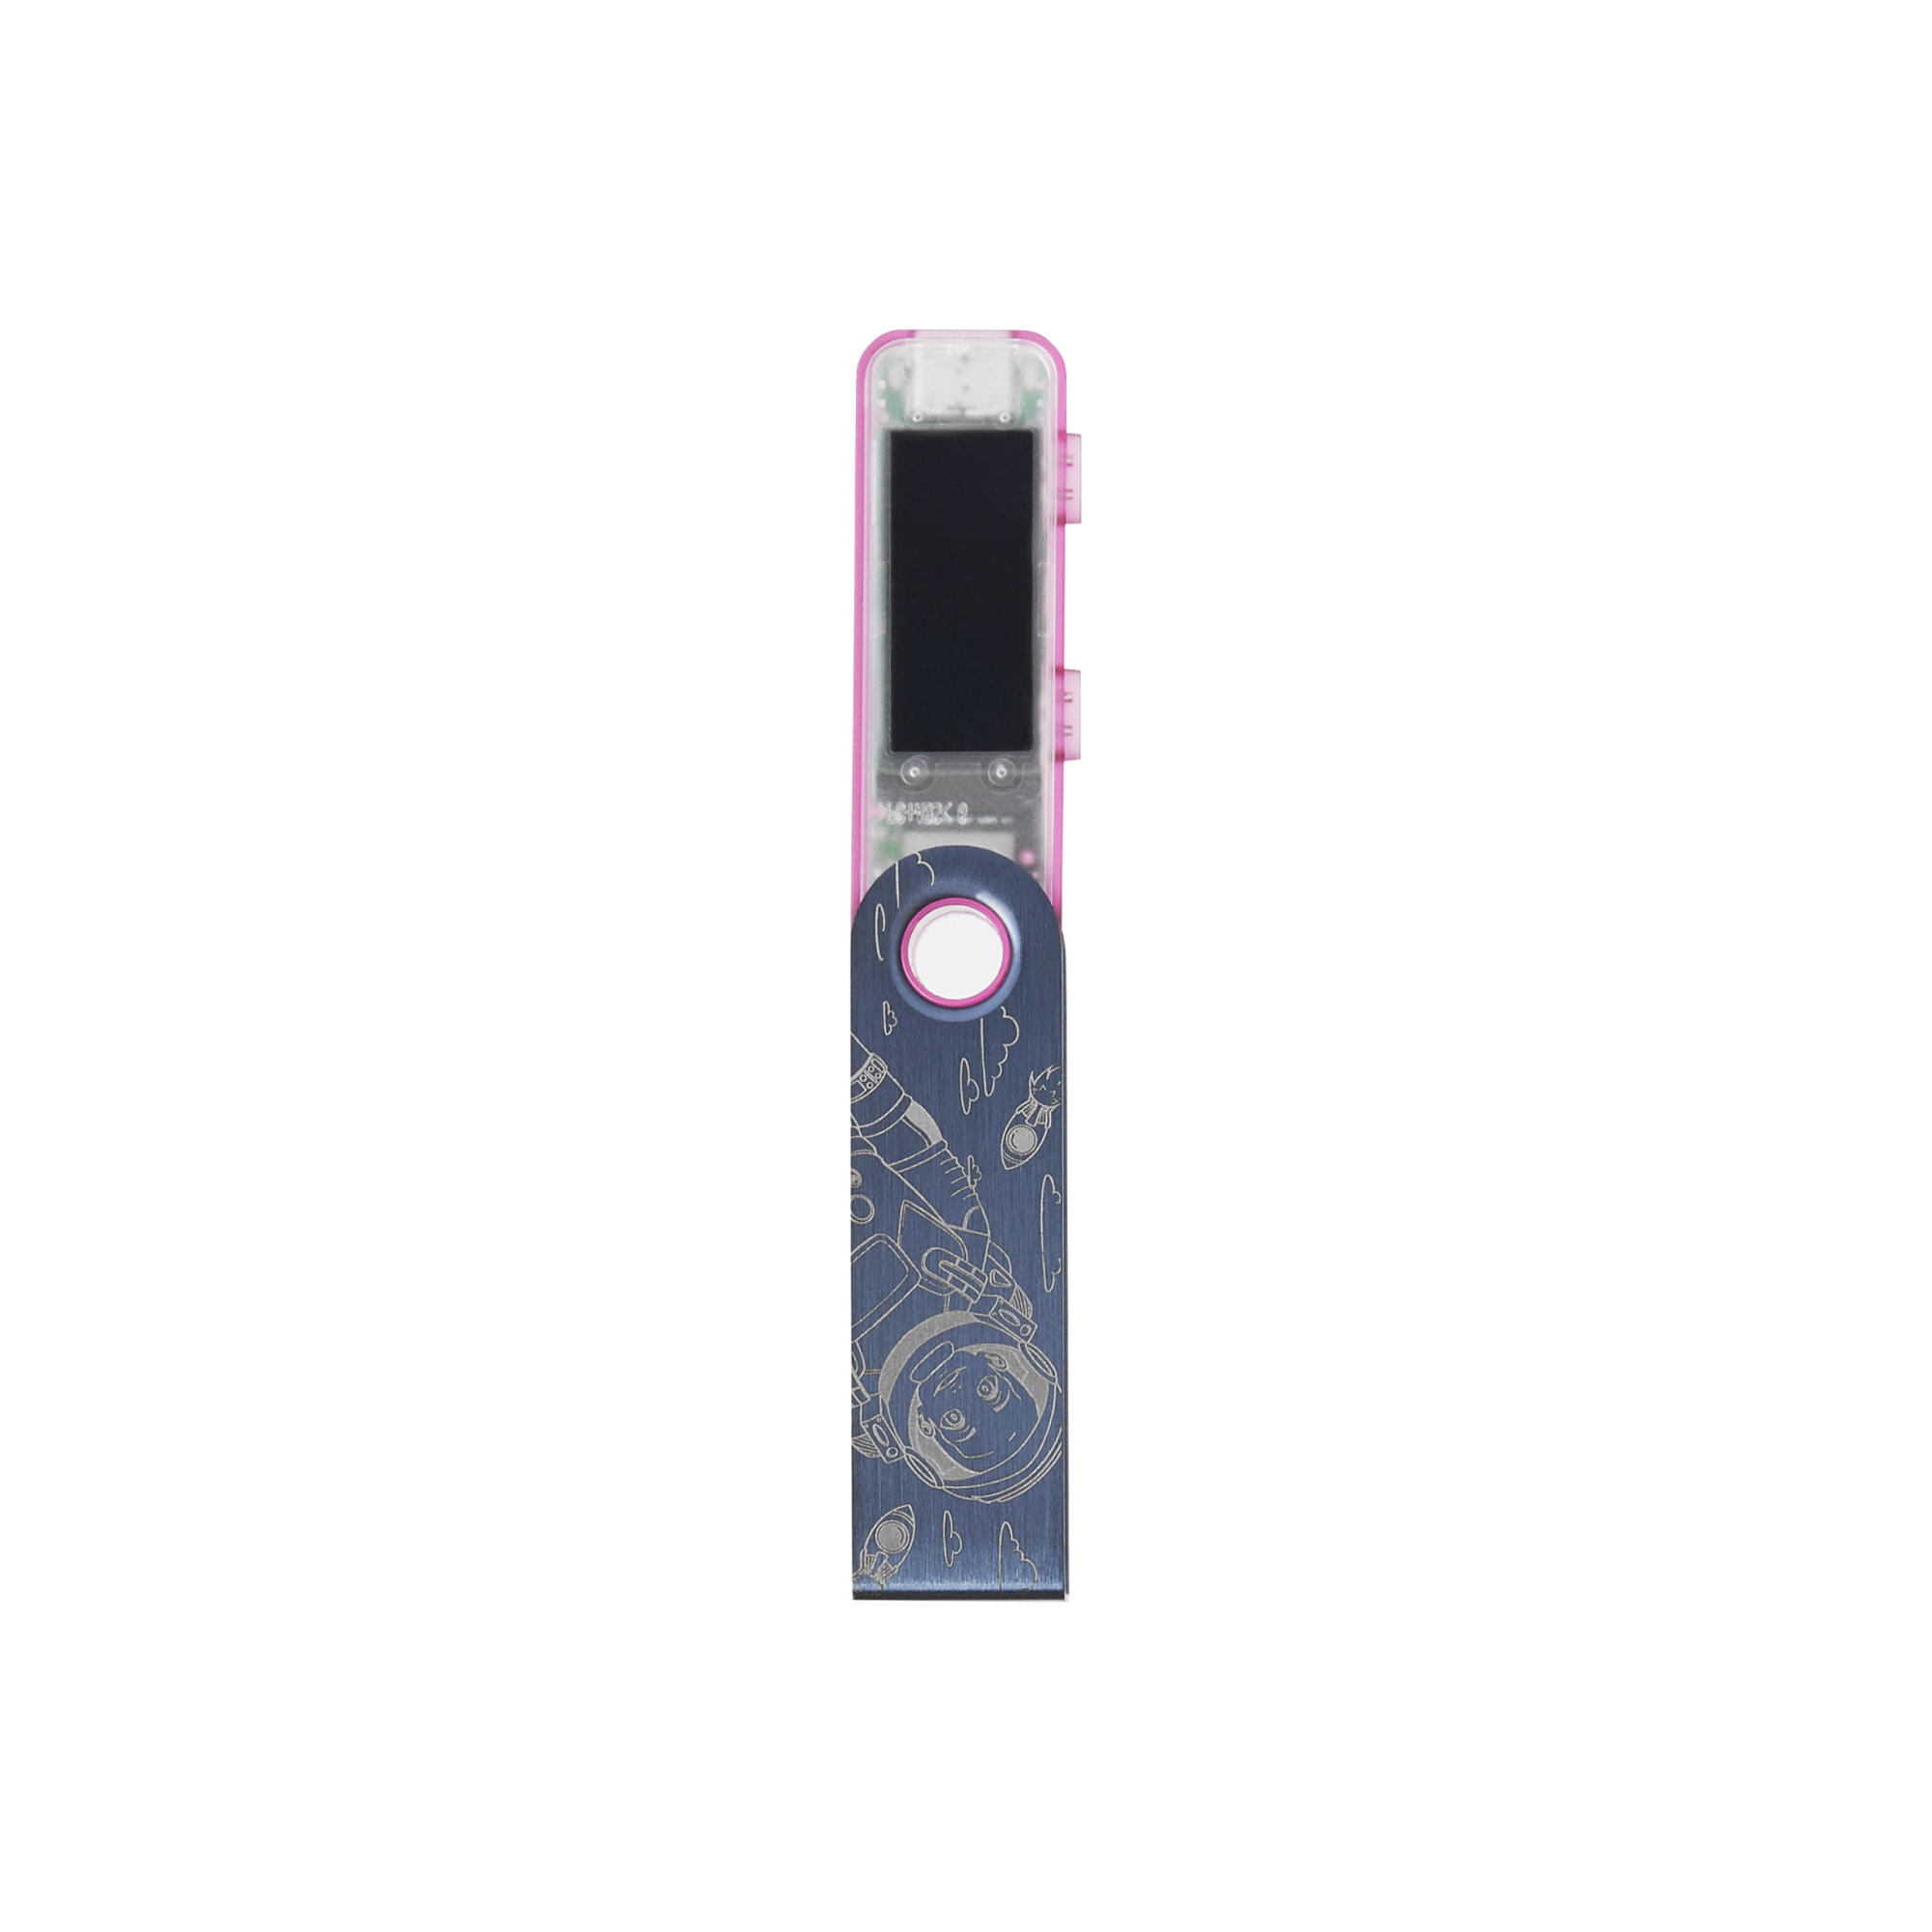 Limited Edition Ledger Nano X - CryptoLondoners - IRL ONLY – Bright Moments